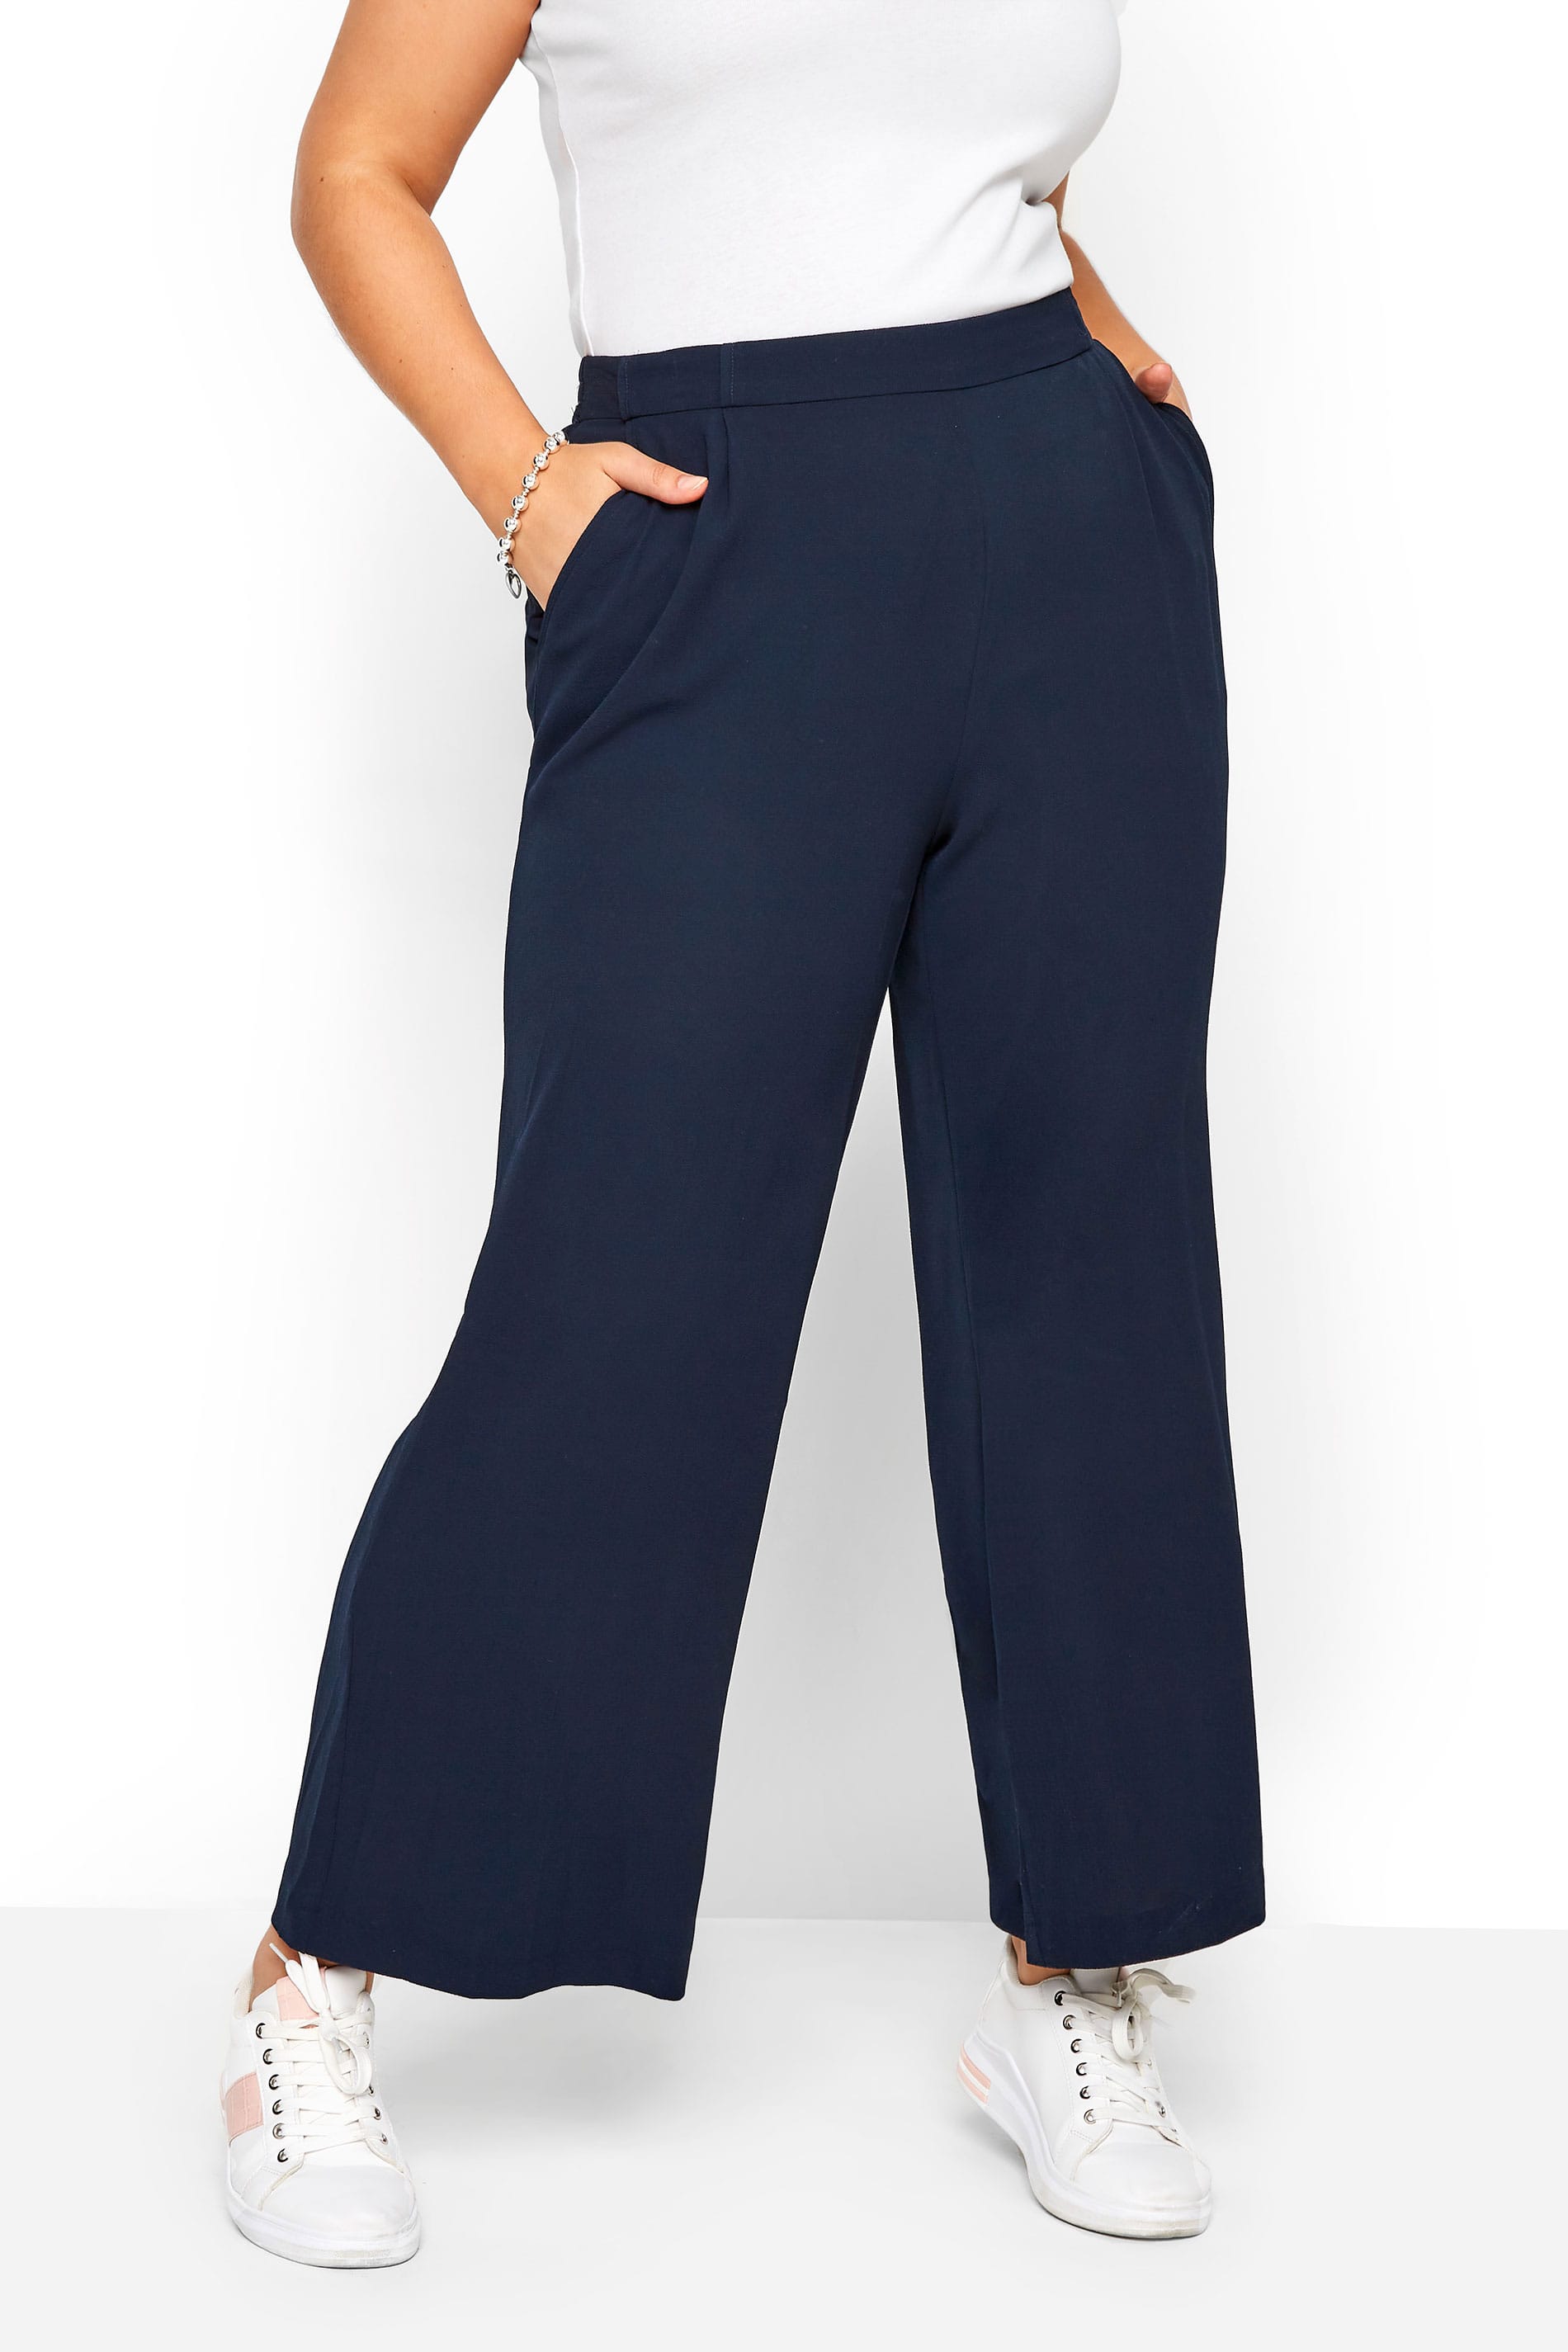 Navy Crepe Single Pleat Trousers | Yours Clothing